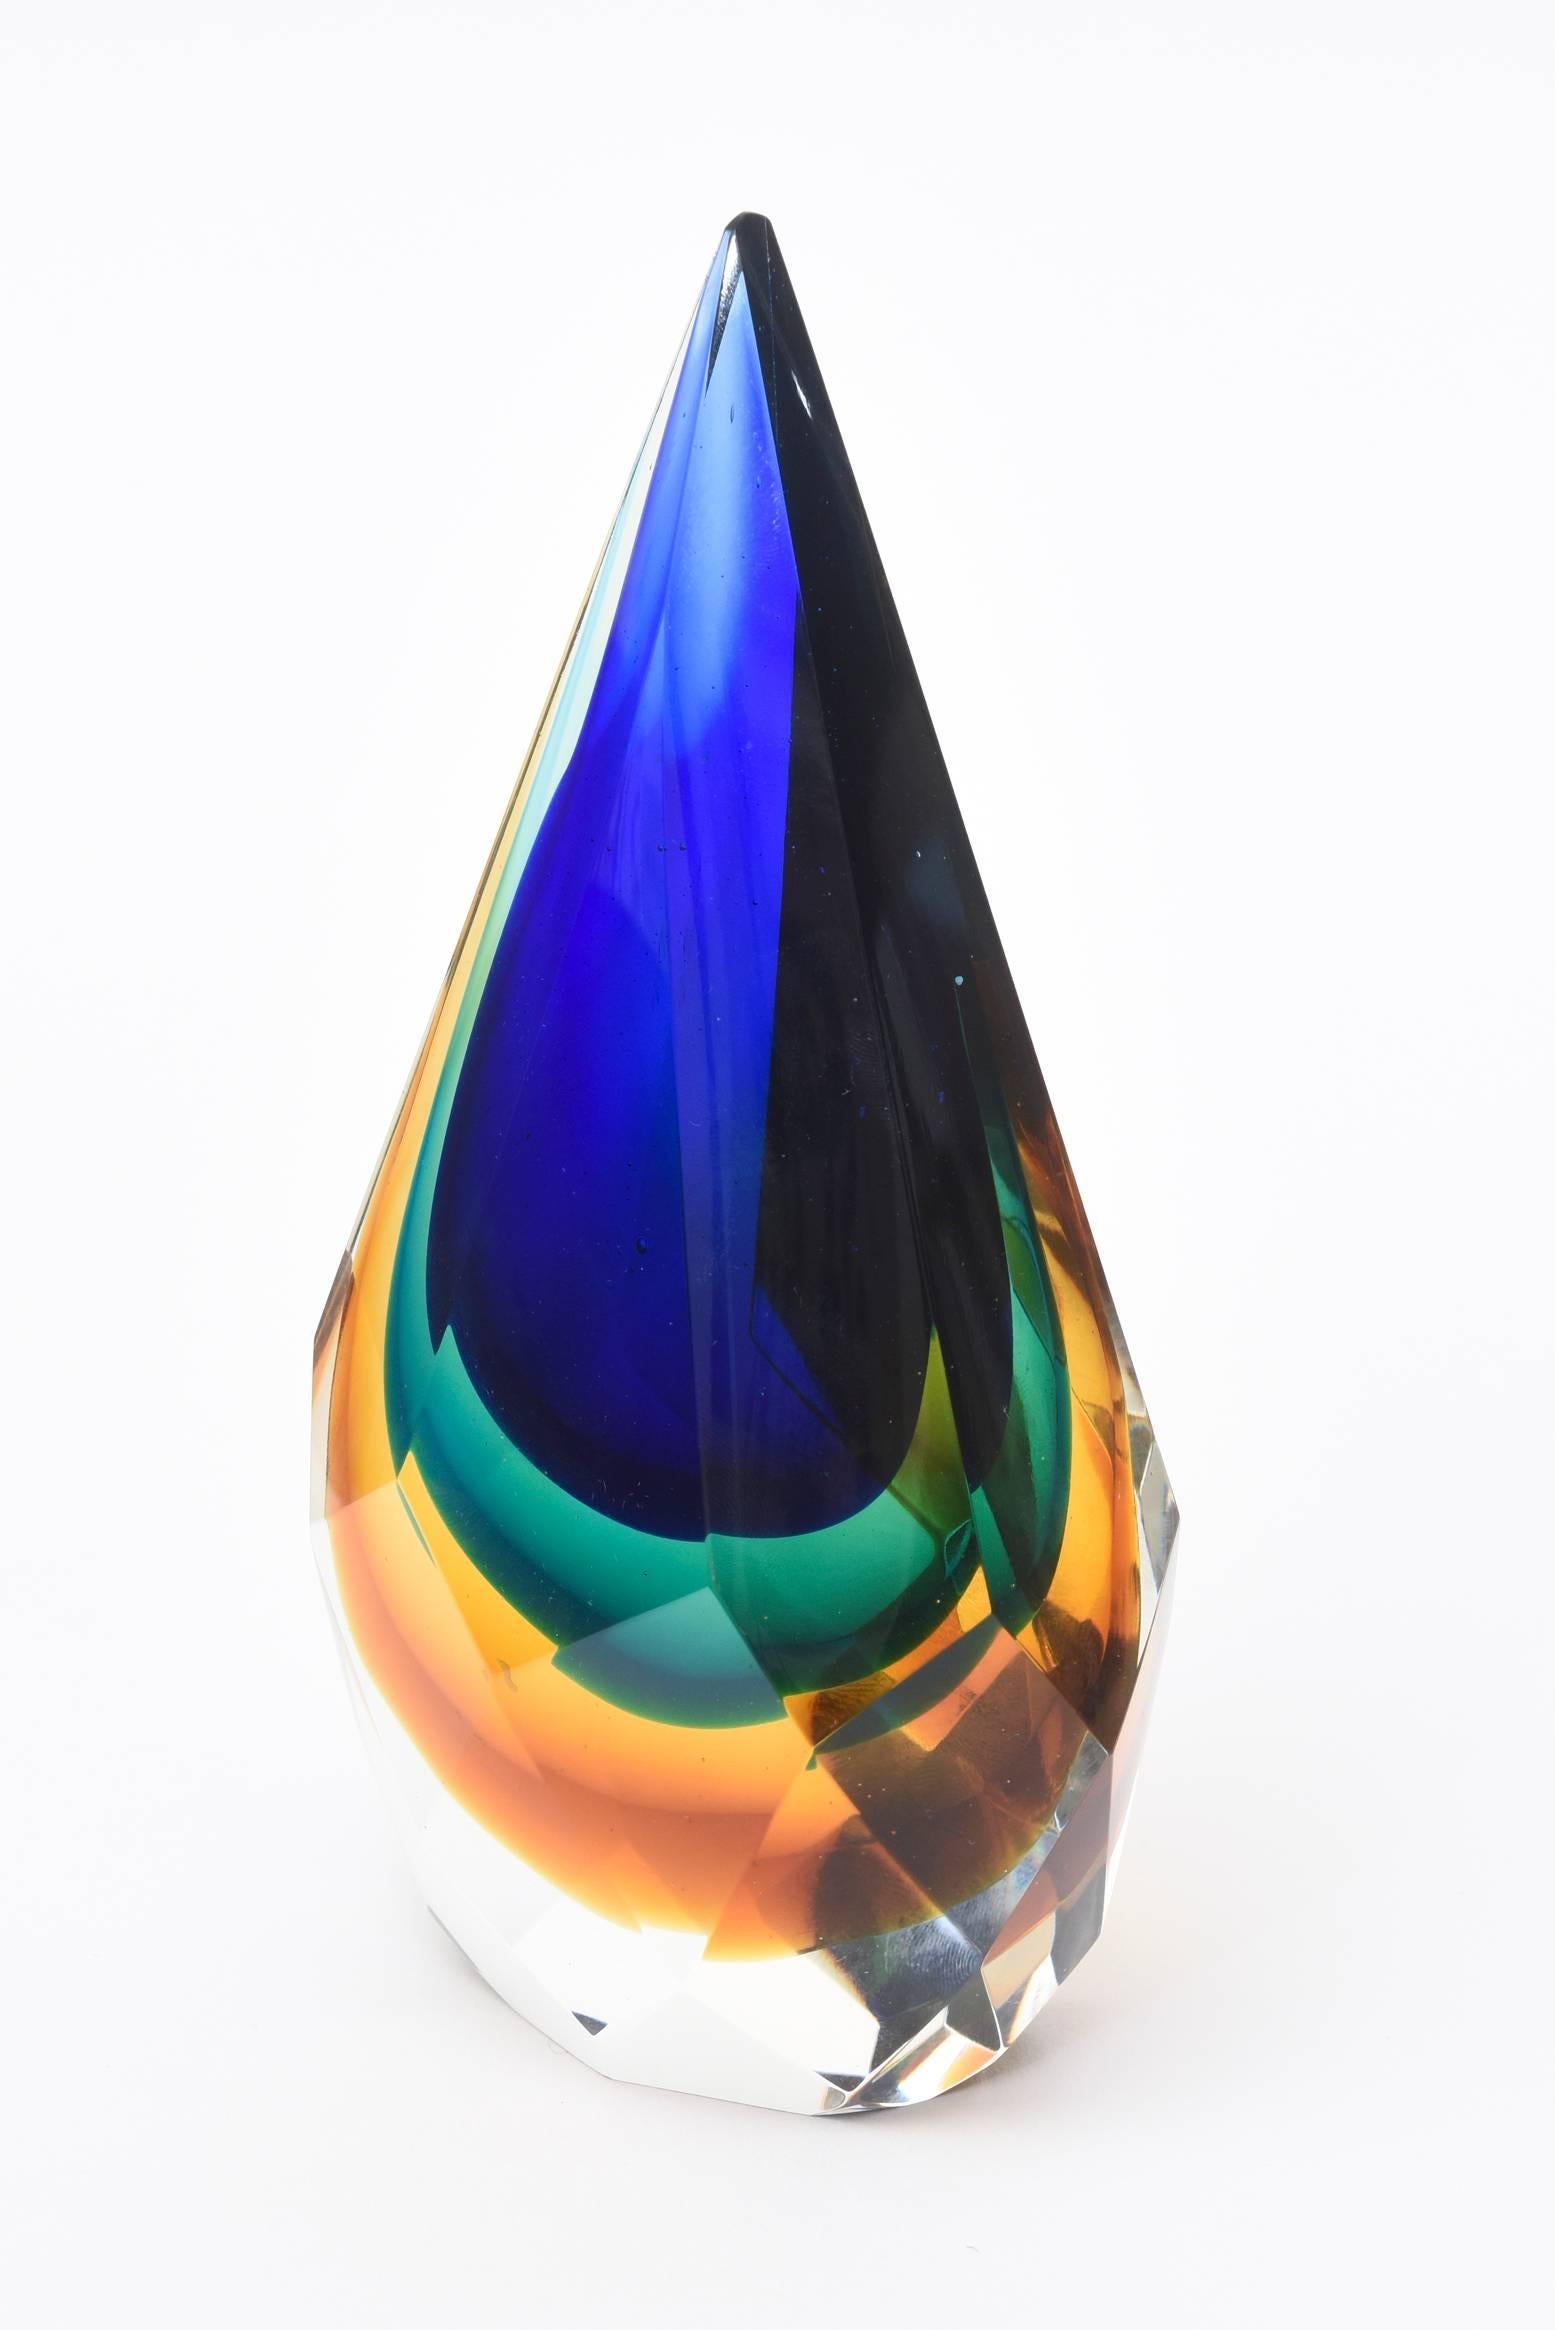 Late 20th Century Italian Murano Diamond Faceted Sommerso Glass Paperweight or Sculpture